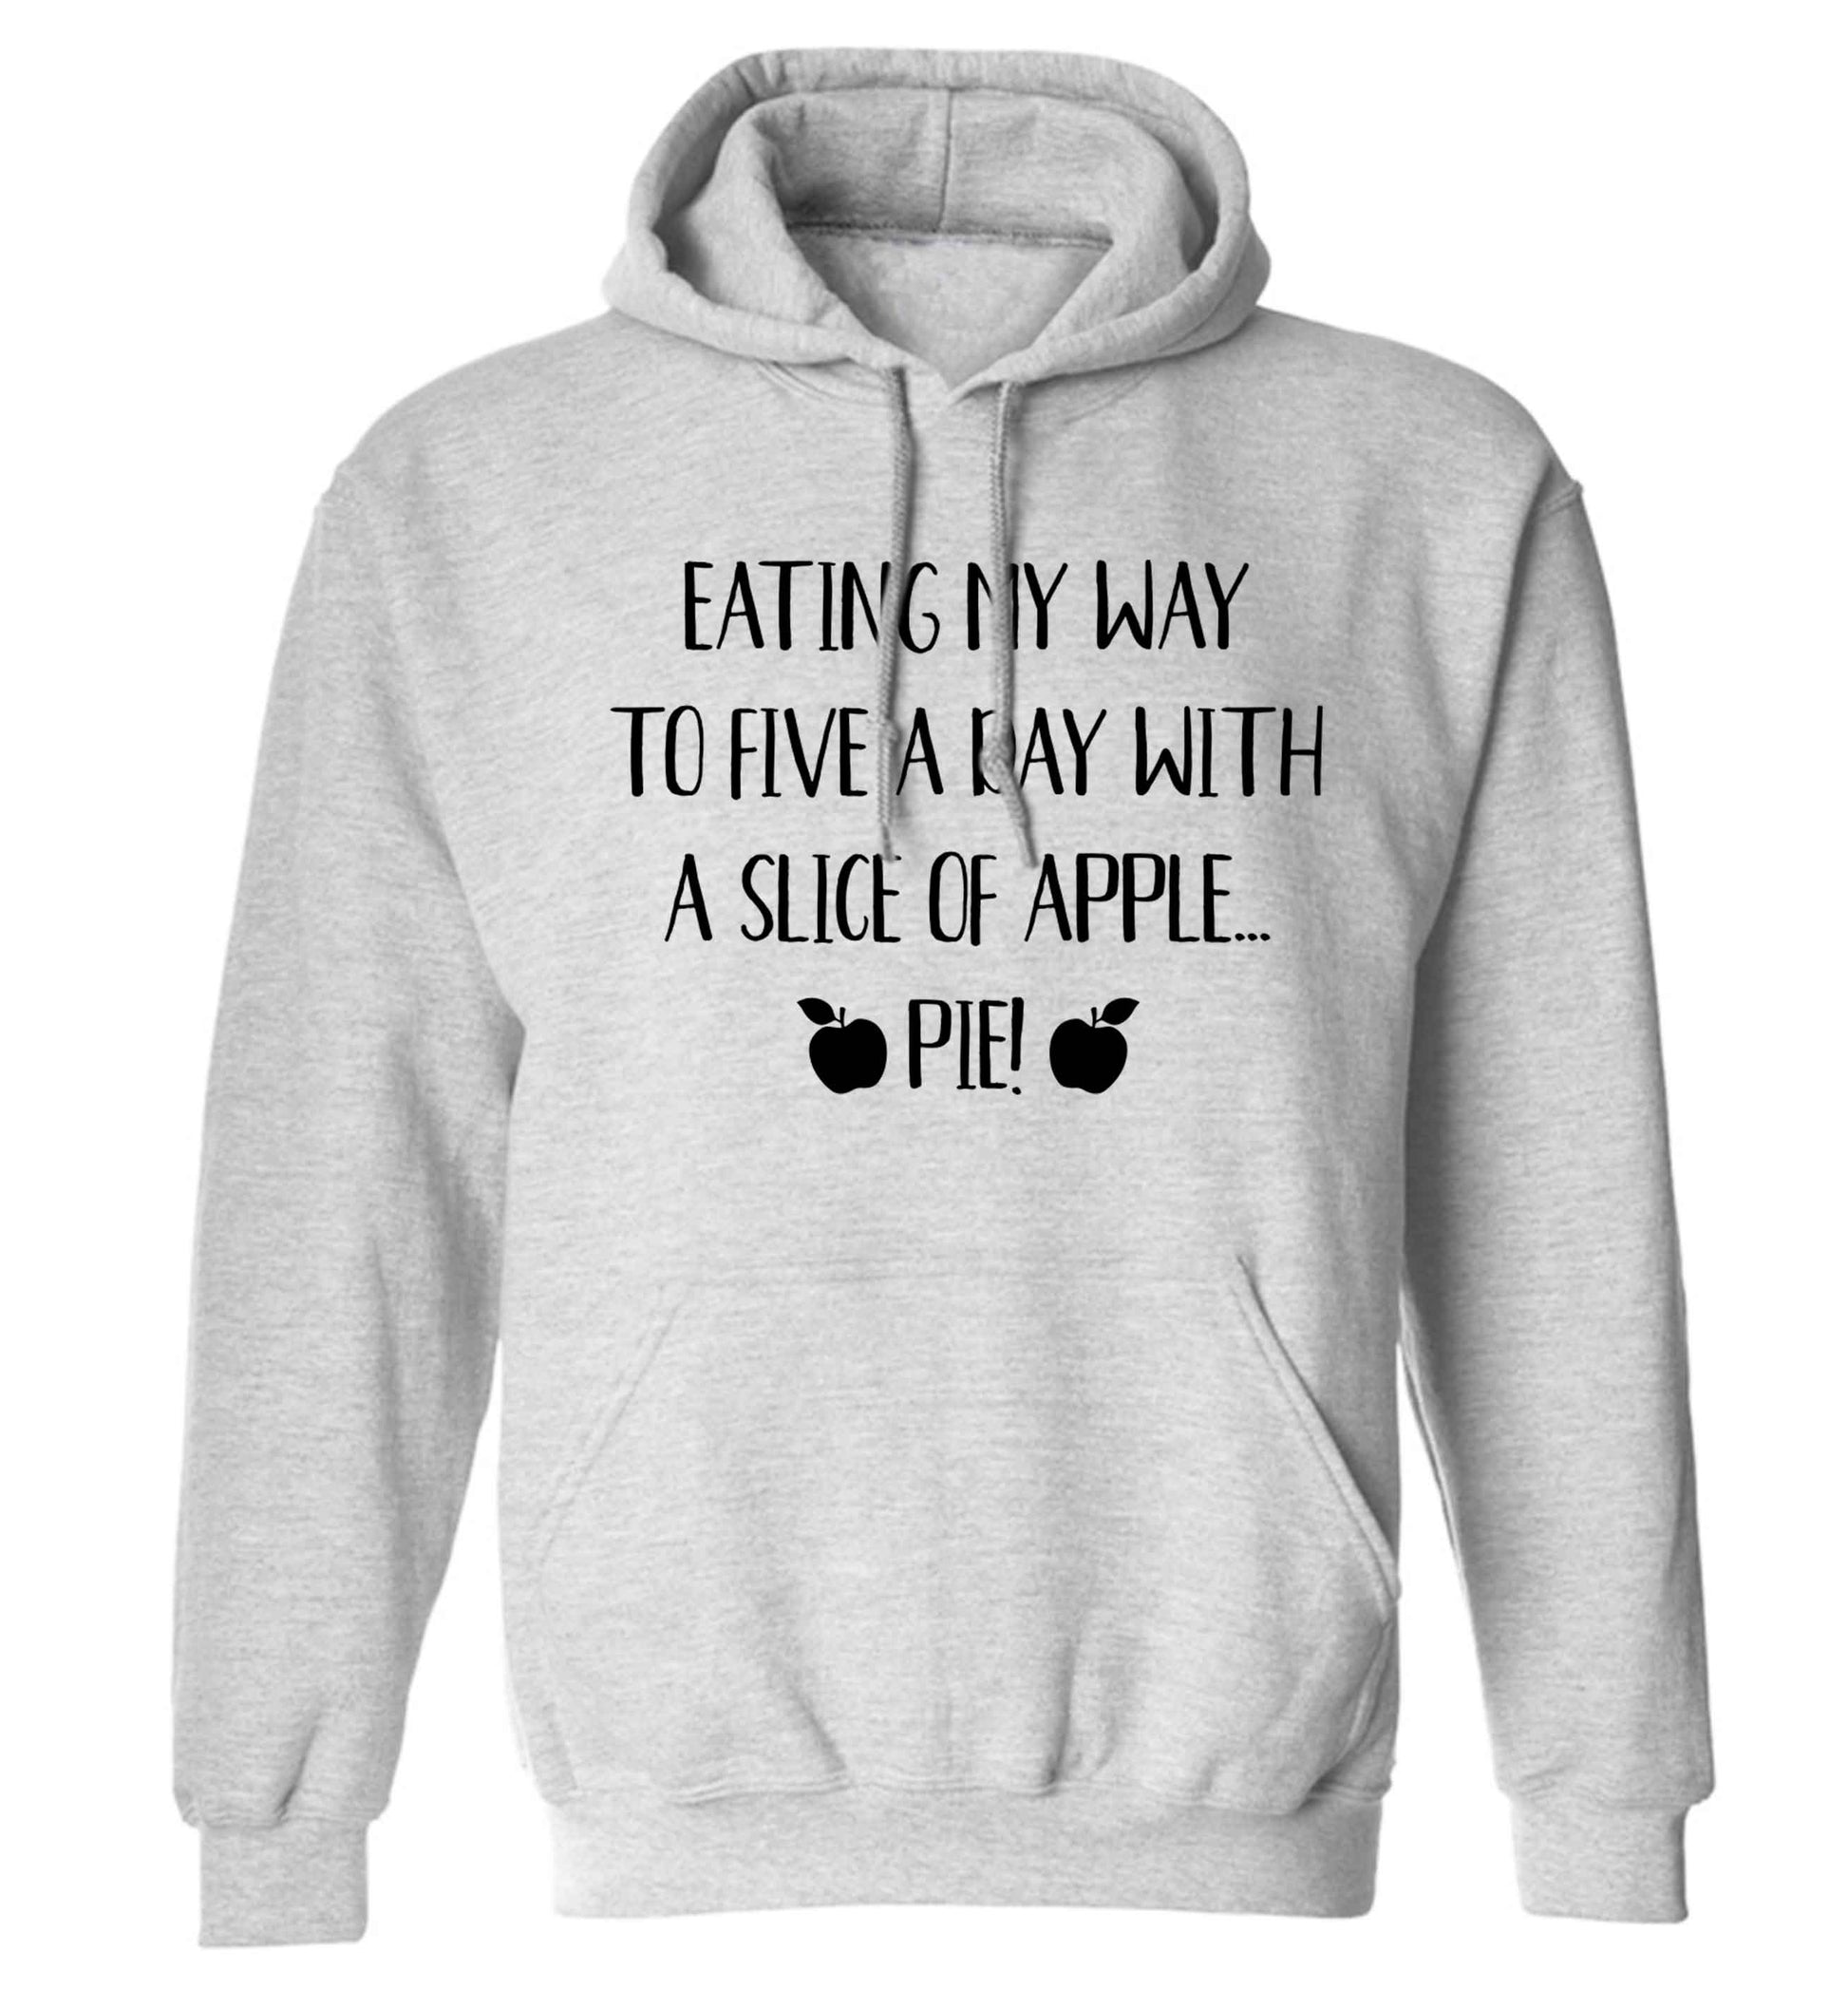 Eating my way to five a day with a slice of apple pie adults unisex grey hoodie 2XL